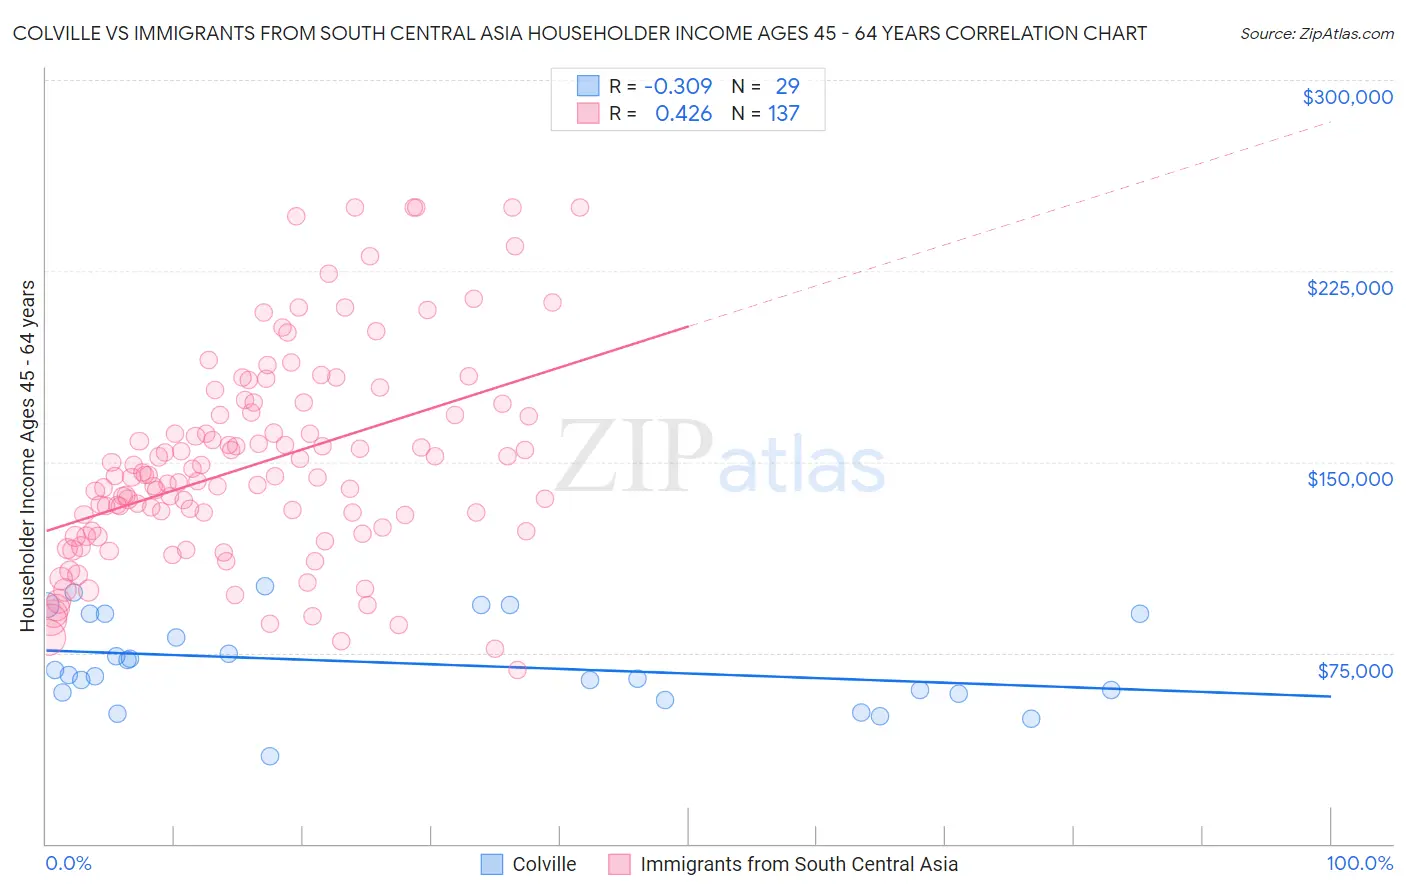 Colville vs Immigrants from South Central Asia Householder Income Ages 45 - 64 years